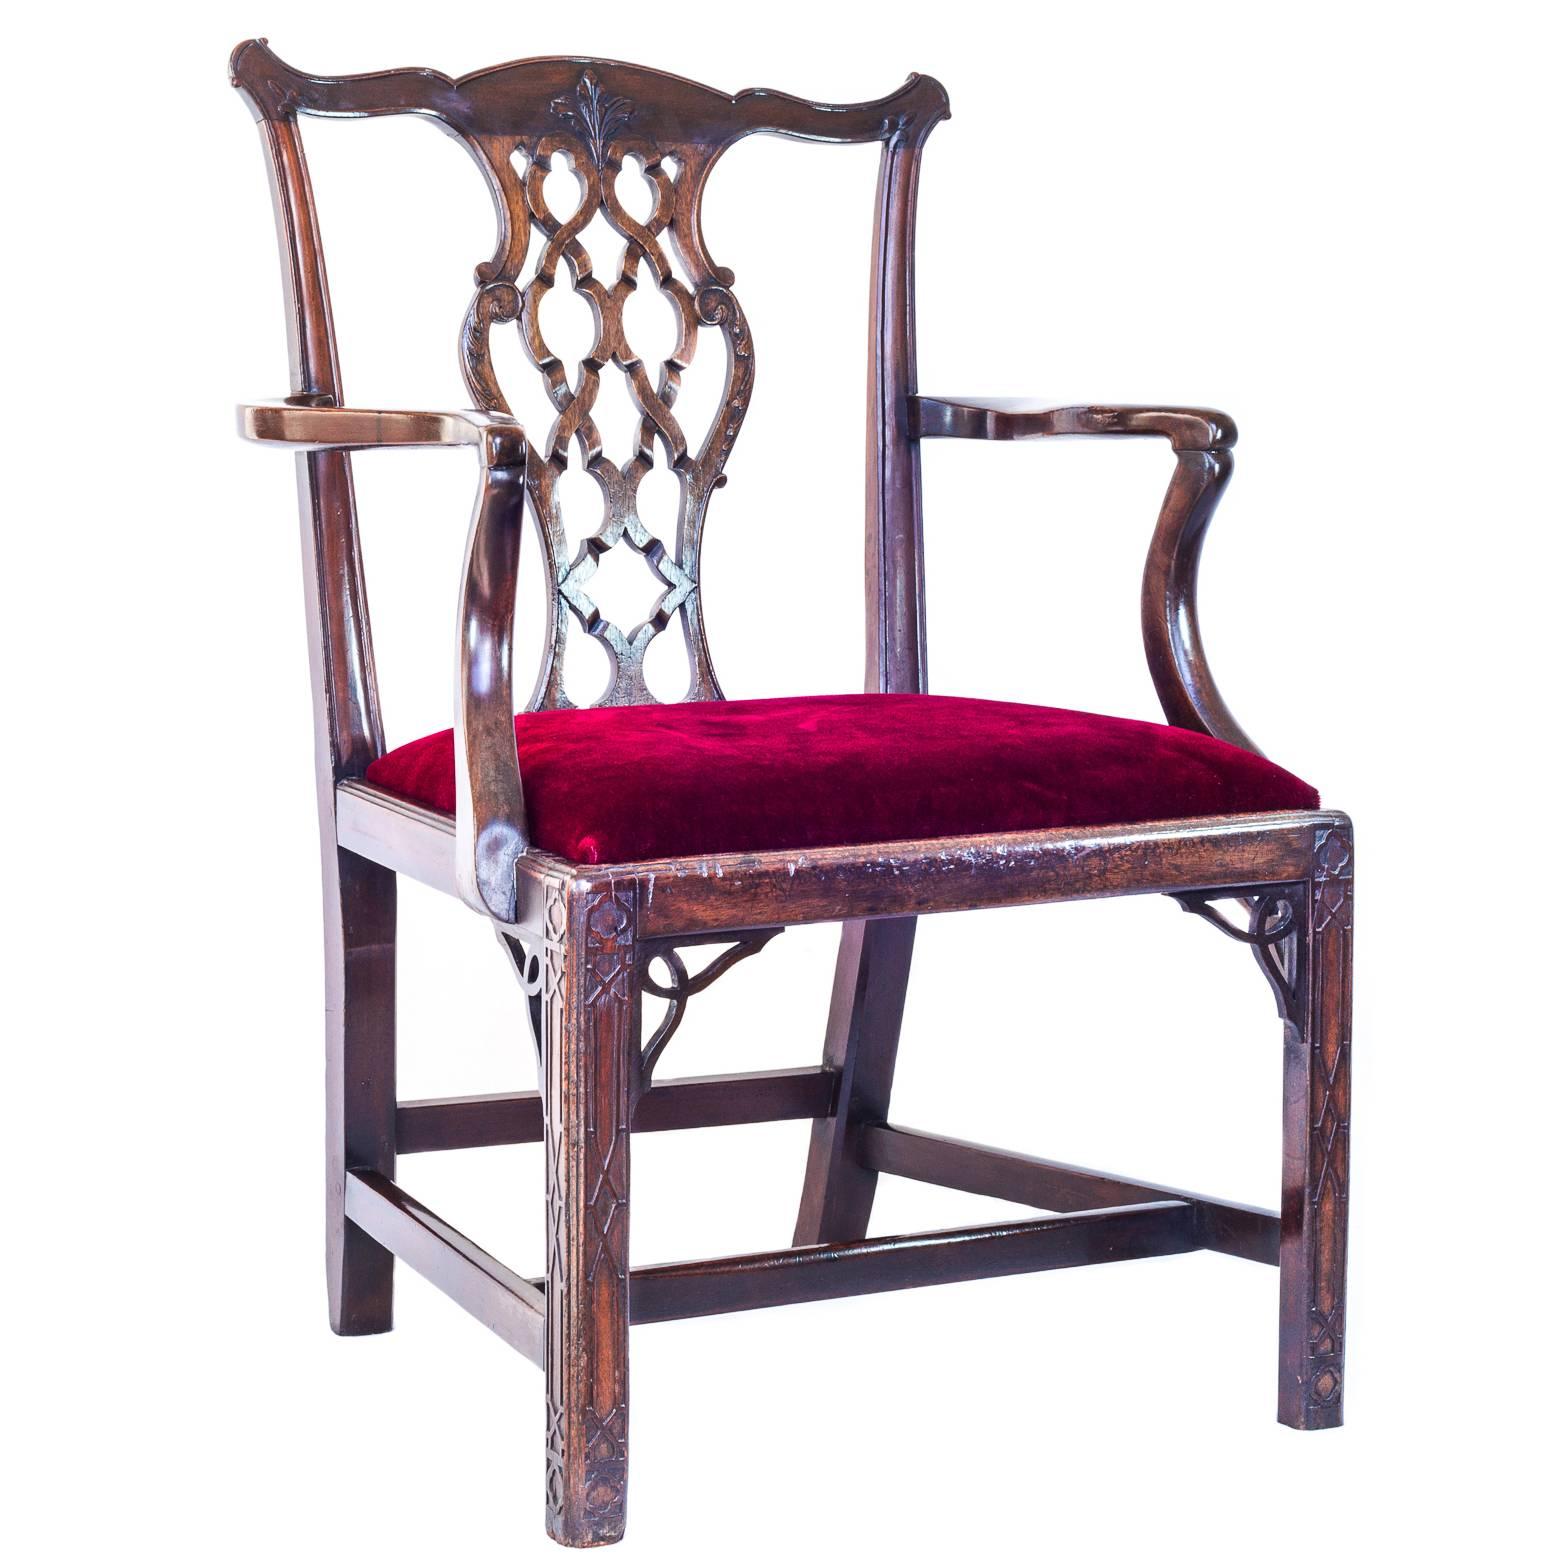 A superb example of George III Chippendale period armchair, in dense mahogany, generously proportioned, having a Gothic-inspired interlaced splat, blind fretwork carving to the front legs and pierced angle brackets to seat rails.

English, circa